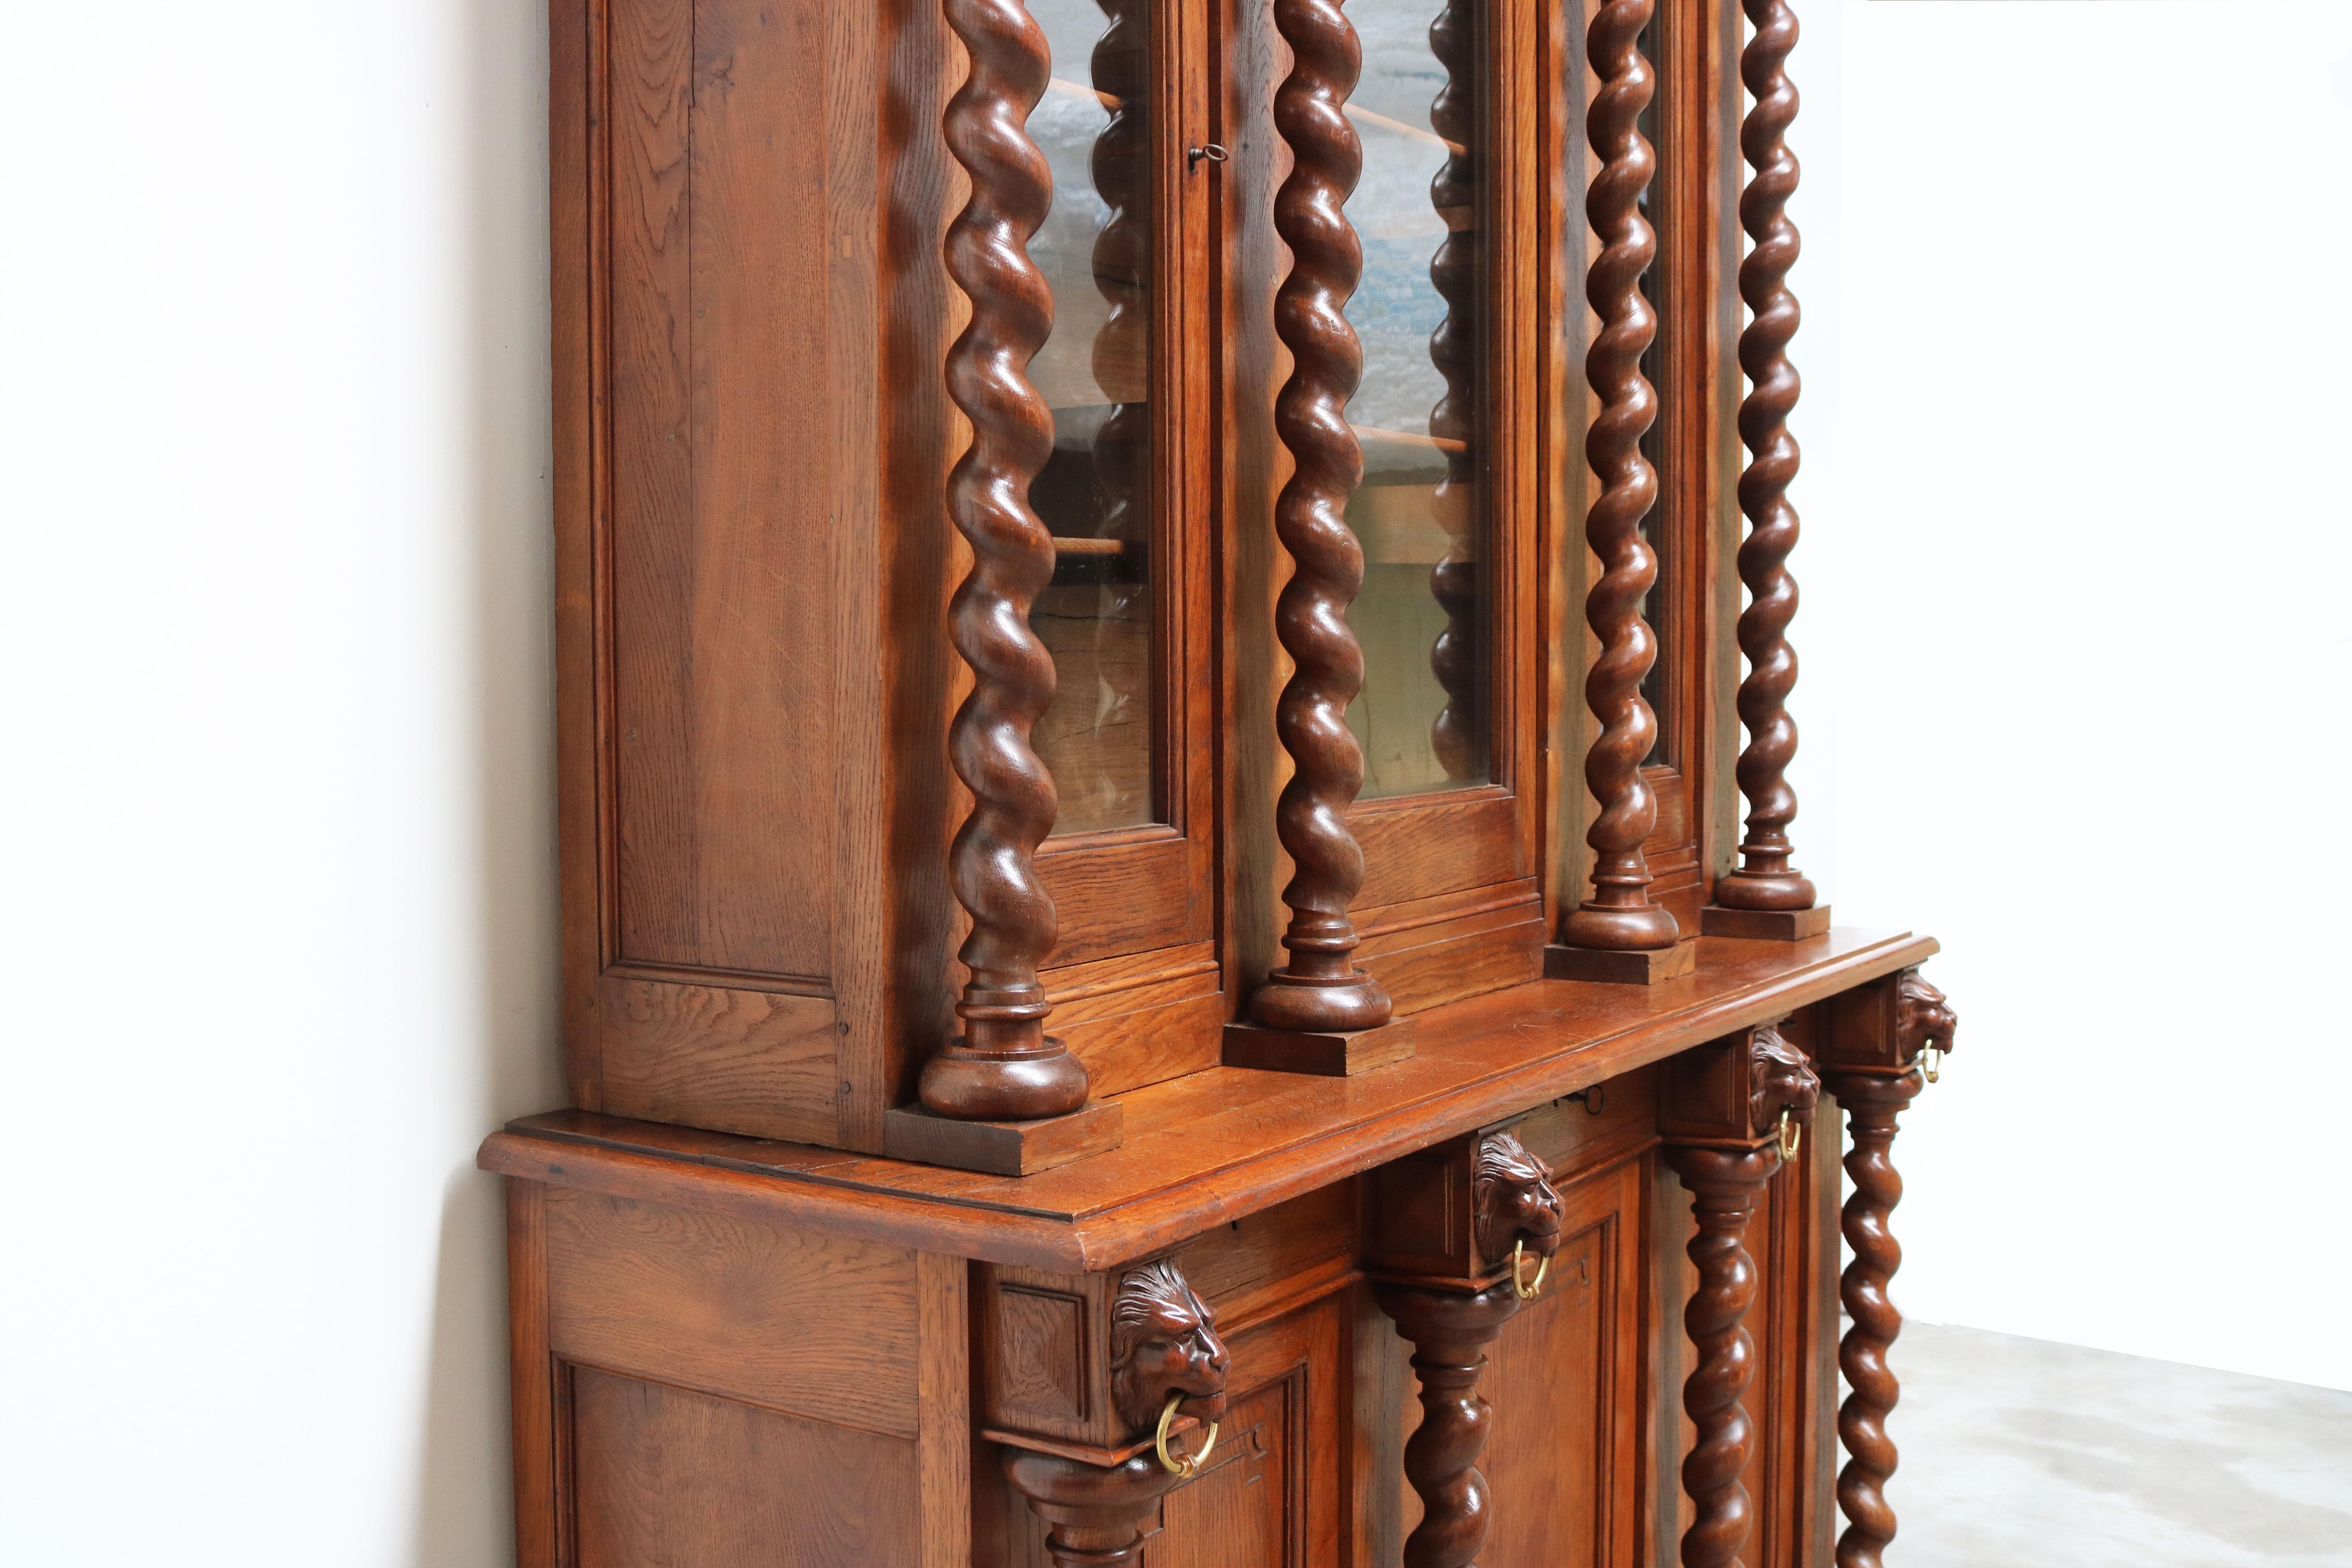 Hand-Carved Large Antique French Renaissance Bookcase Cabinet 19th Century Barley Twist Oak For Sale